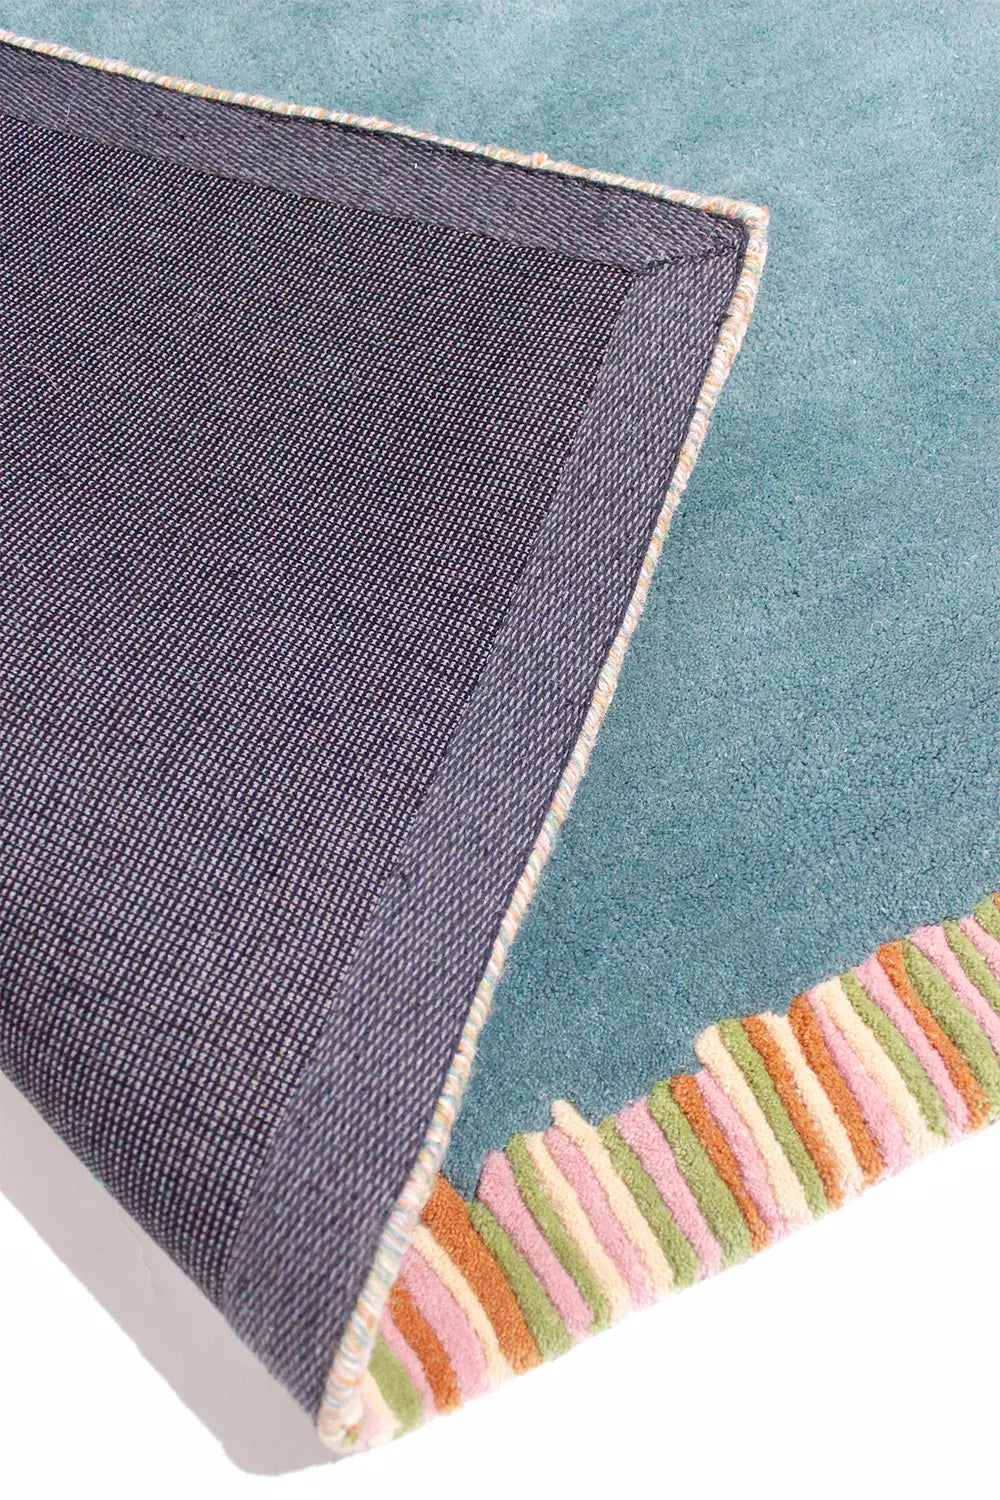 Stitched and Striped: Teal and Orange Wool Hand Tufted Rug